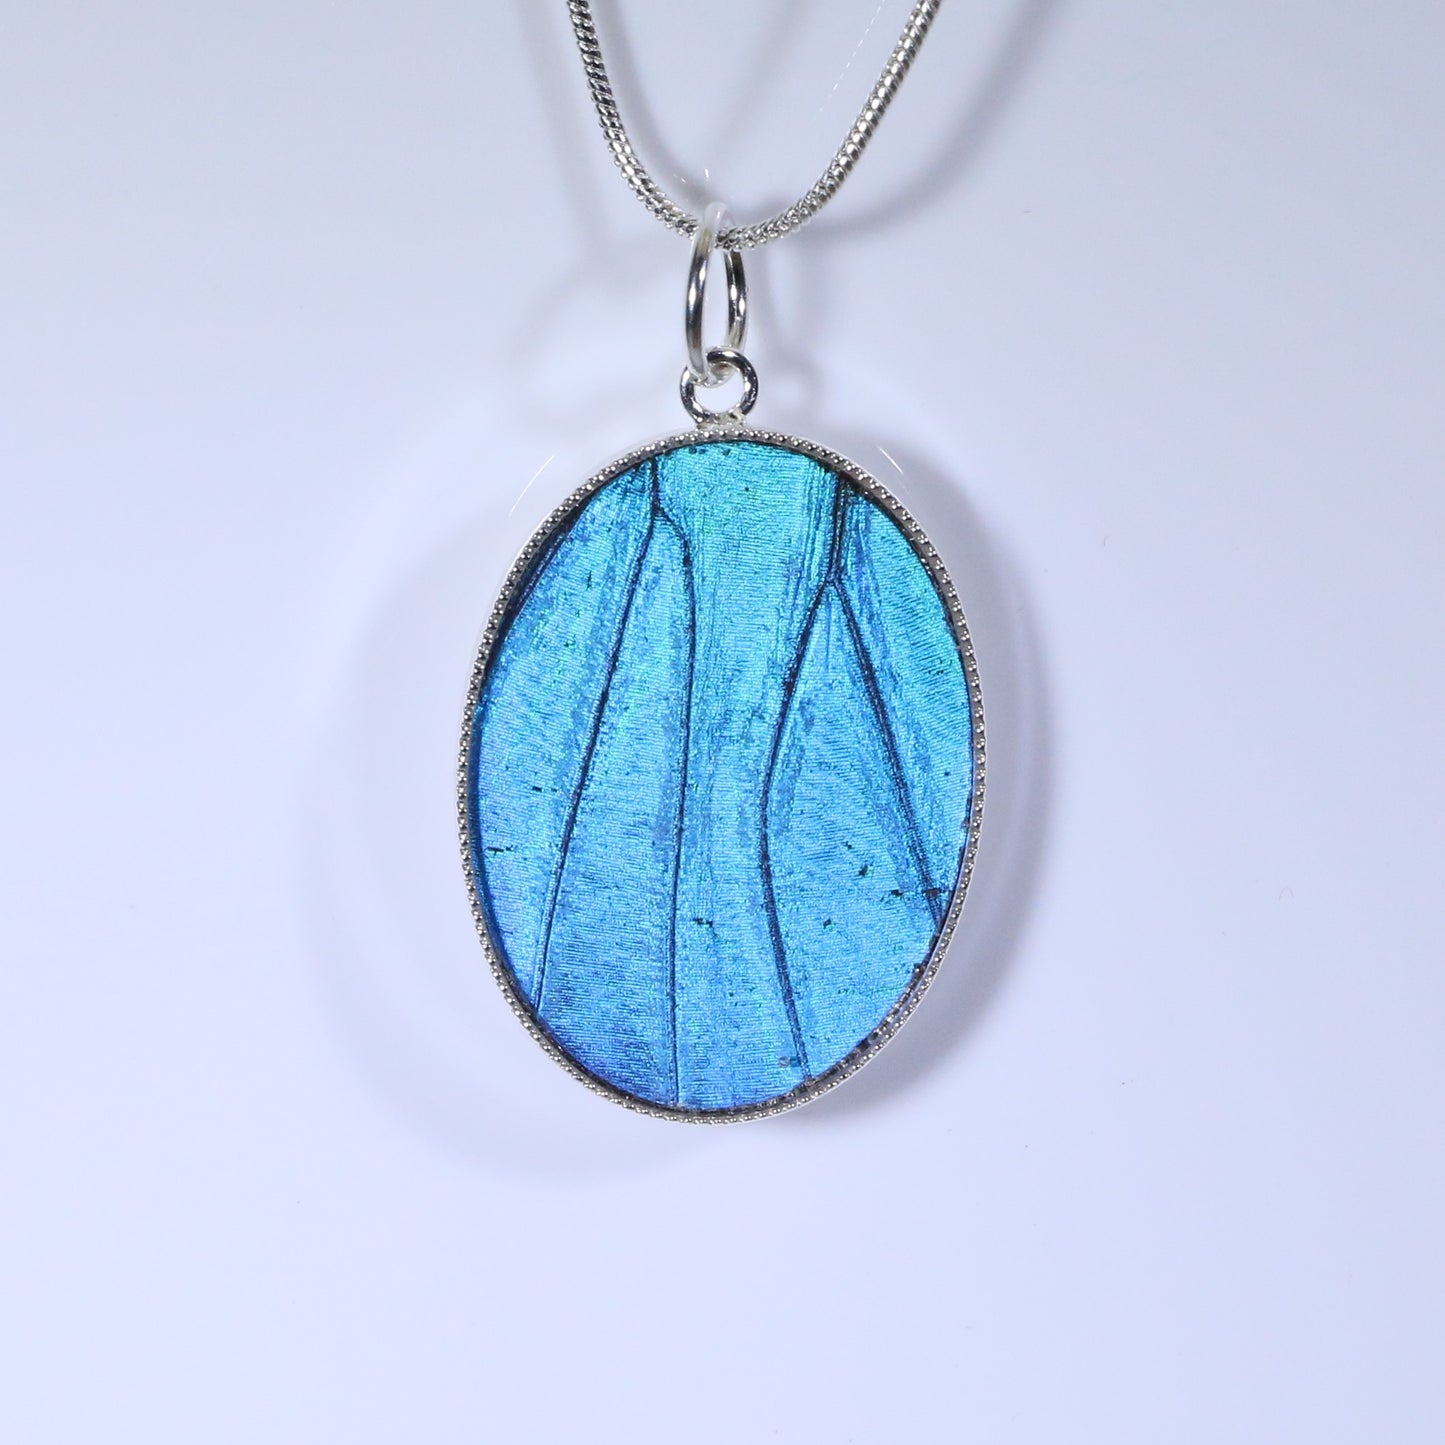 52301 - Real Butterfly Wing Jewelry - Pendant - Large - Blue Morpho